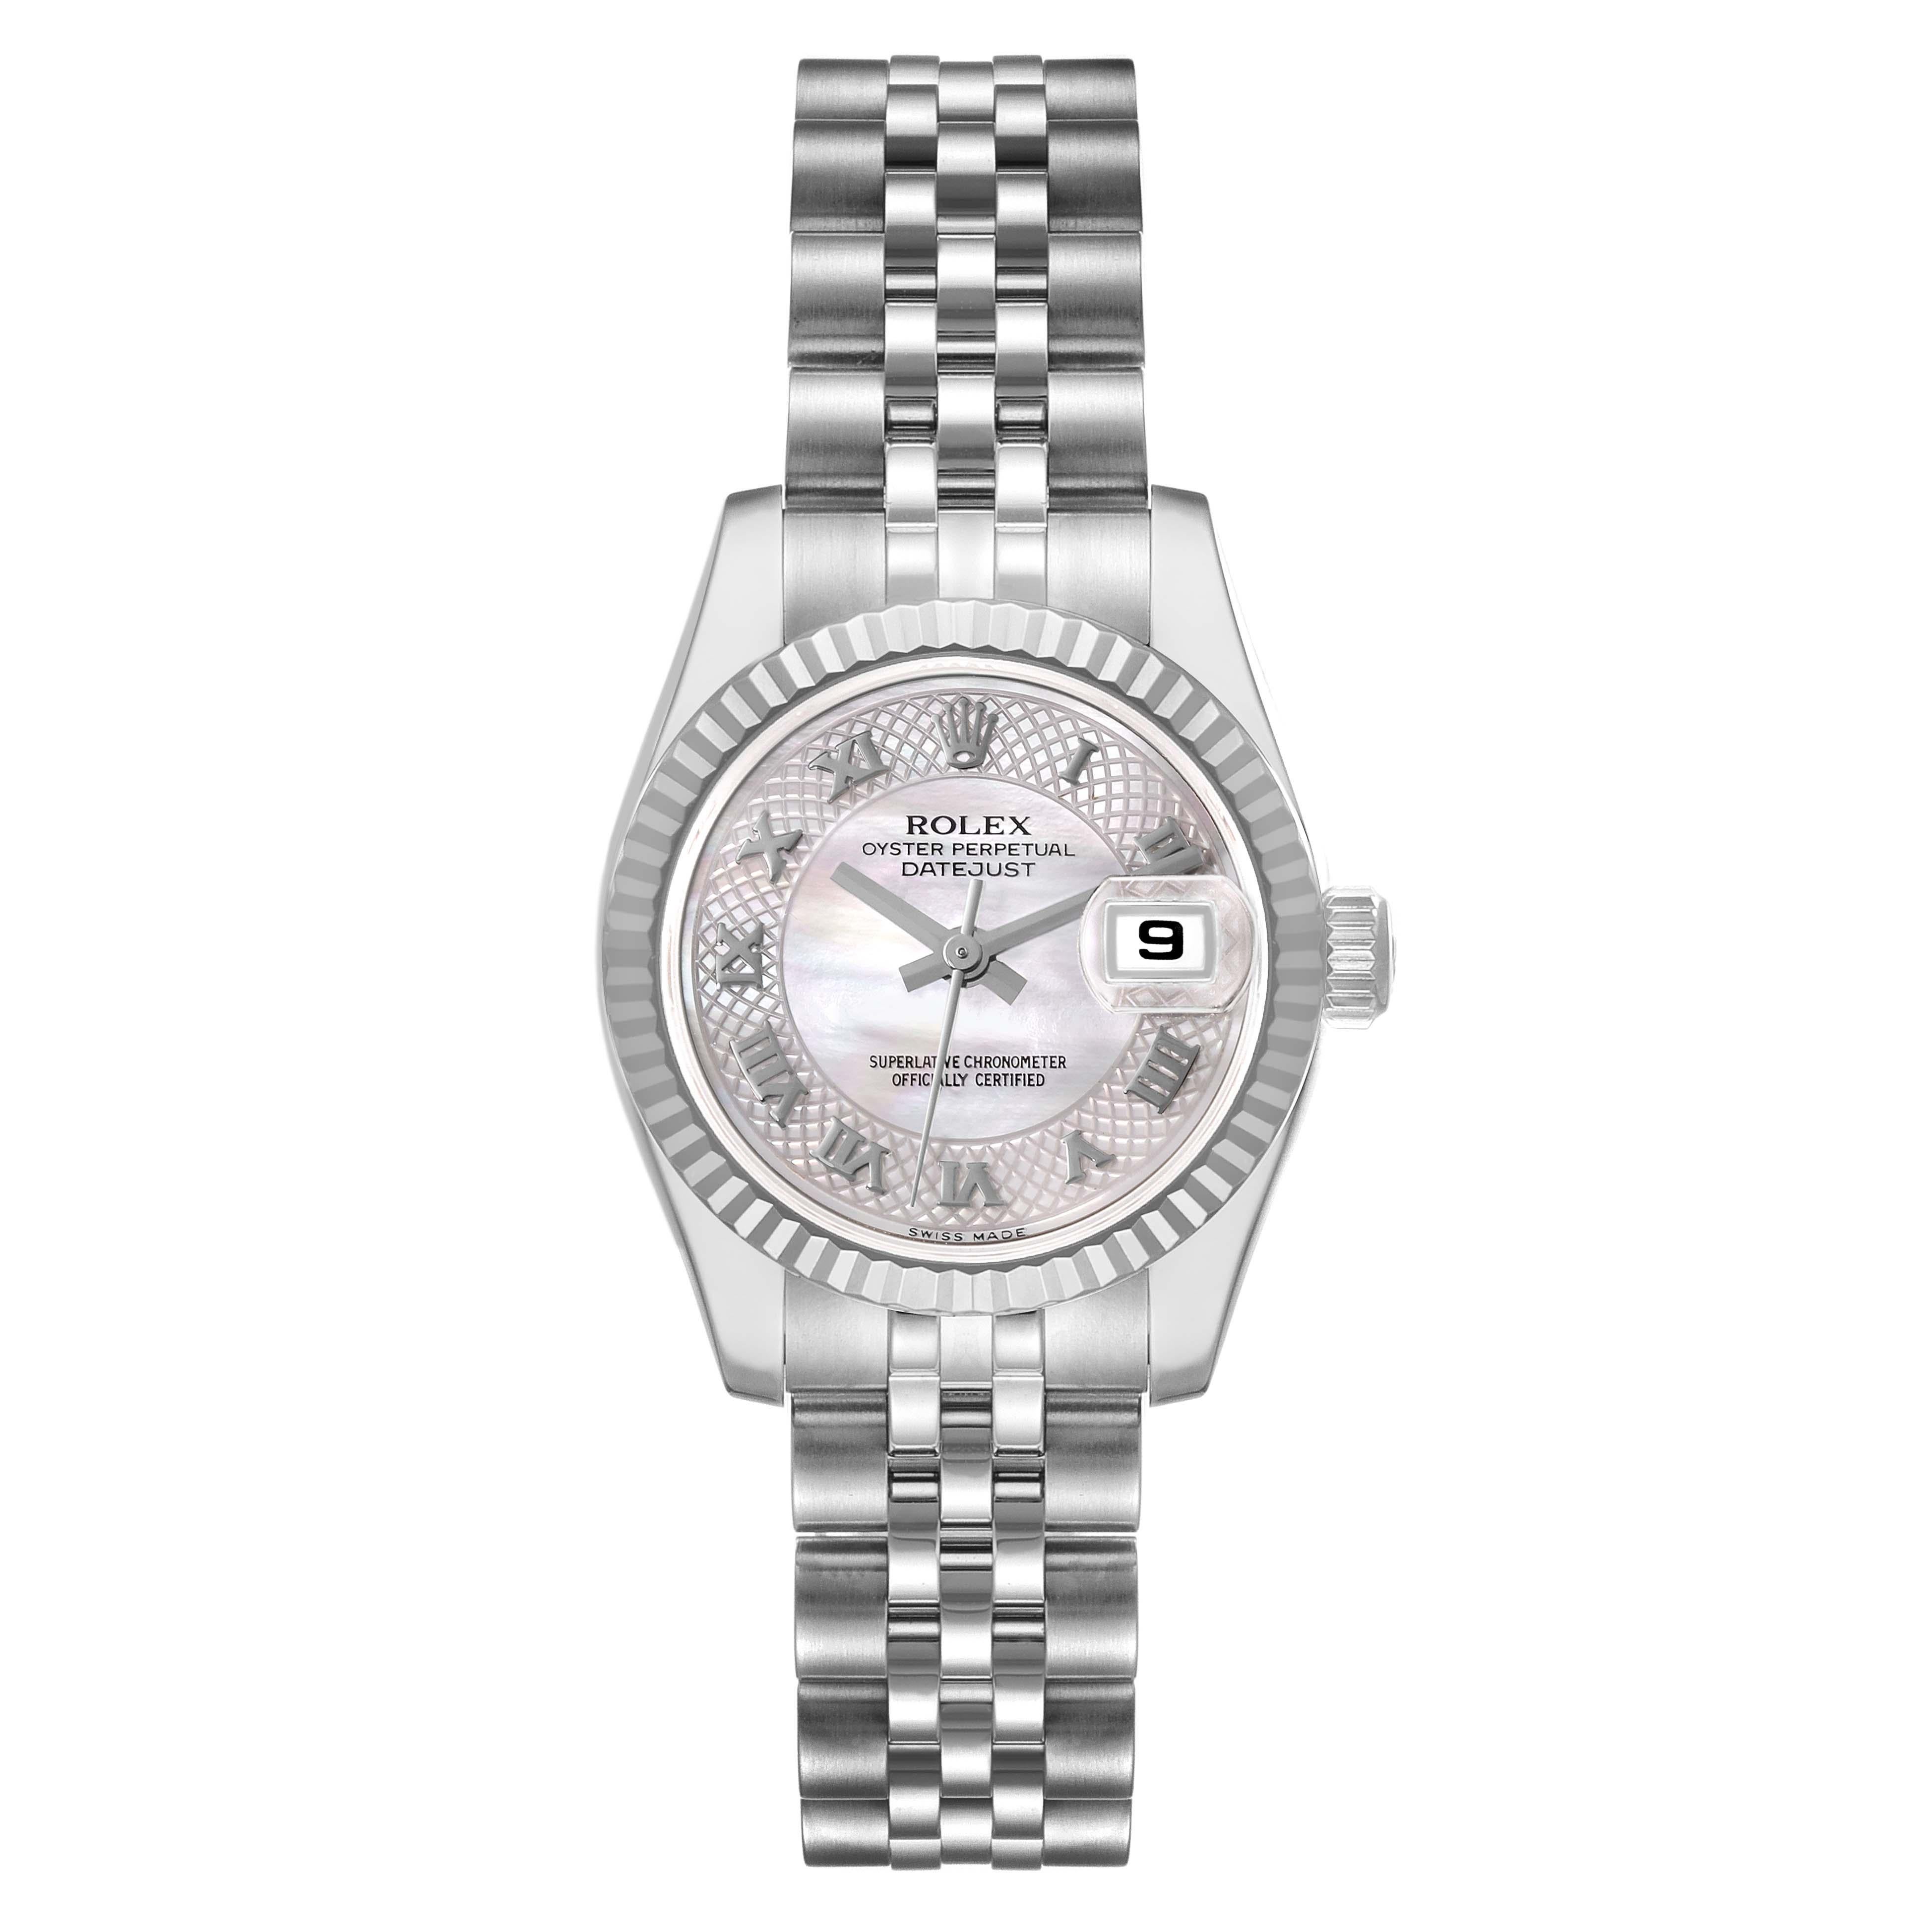 Rolex Datejust Steel White Gold Decorated MOP Ladies Watch 179174 Box Card. Officially certified chronometer automatic self-winding movement. Stainless steel oyster case 26.0 mm in diameter. Rolex logo on the crown. 18K white gold fluted bezel.